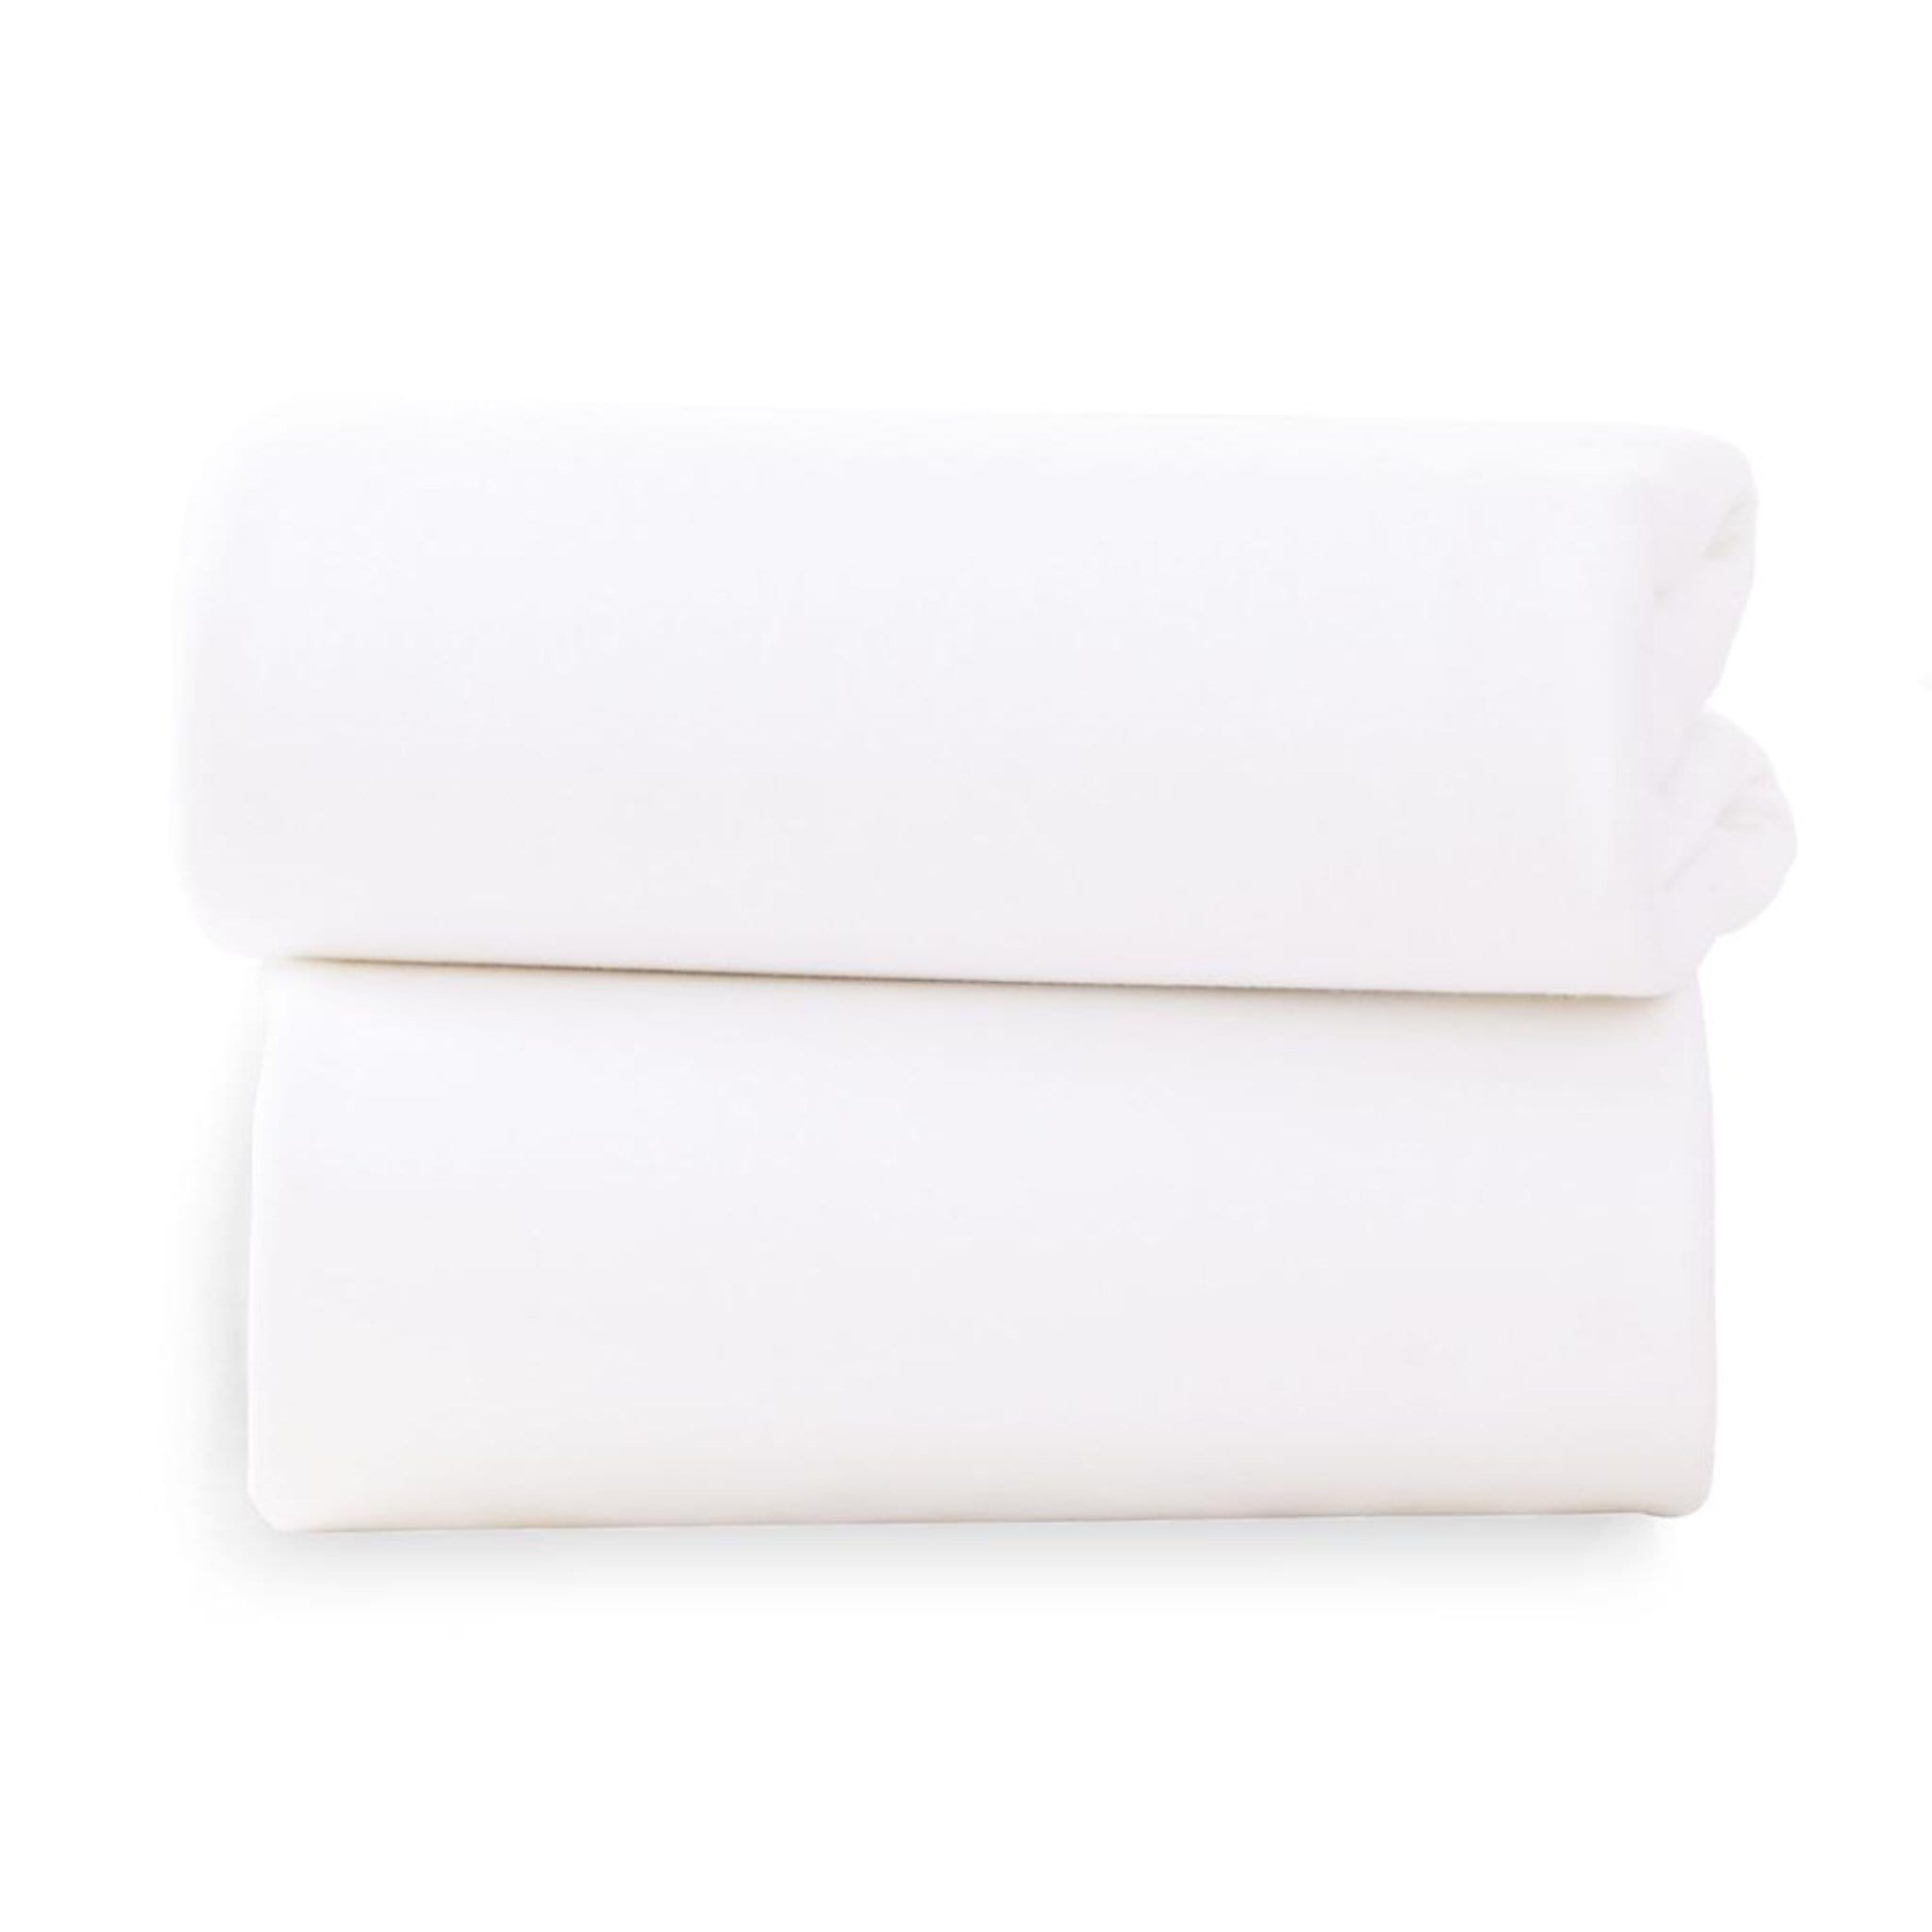 Clair De Lune 2 Pack Universal Bedside Crib Fitted Sheets White Cot & Cot Bed Sheets CL5957WE 5033775000963